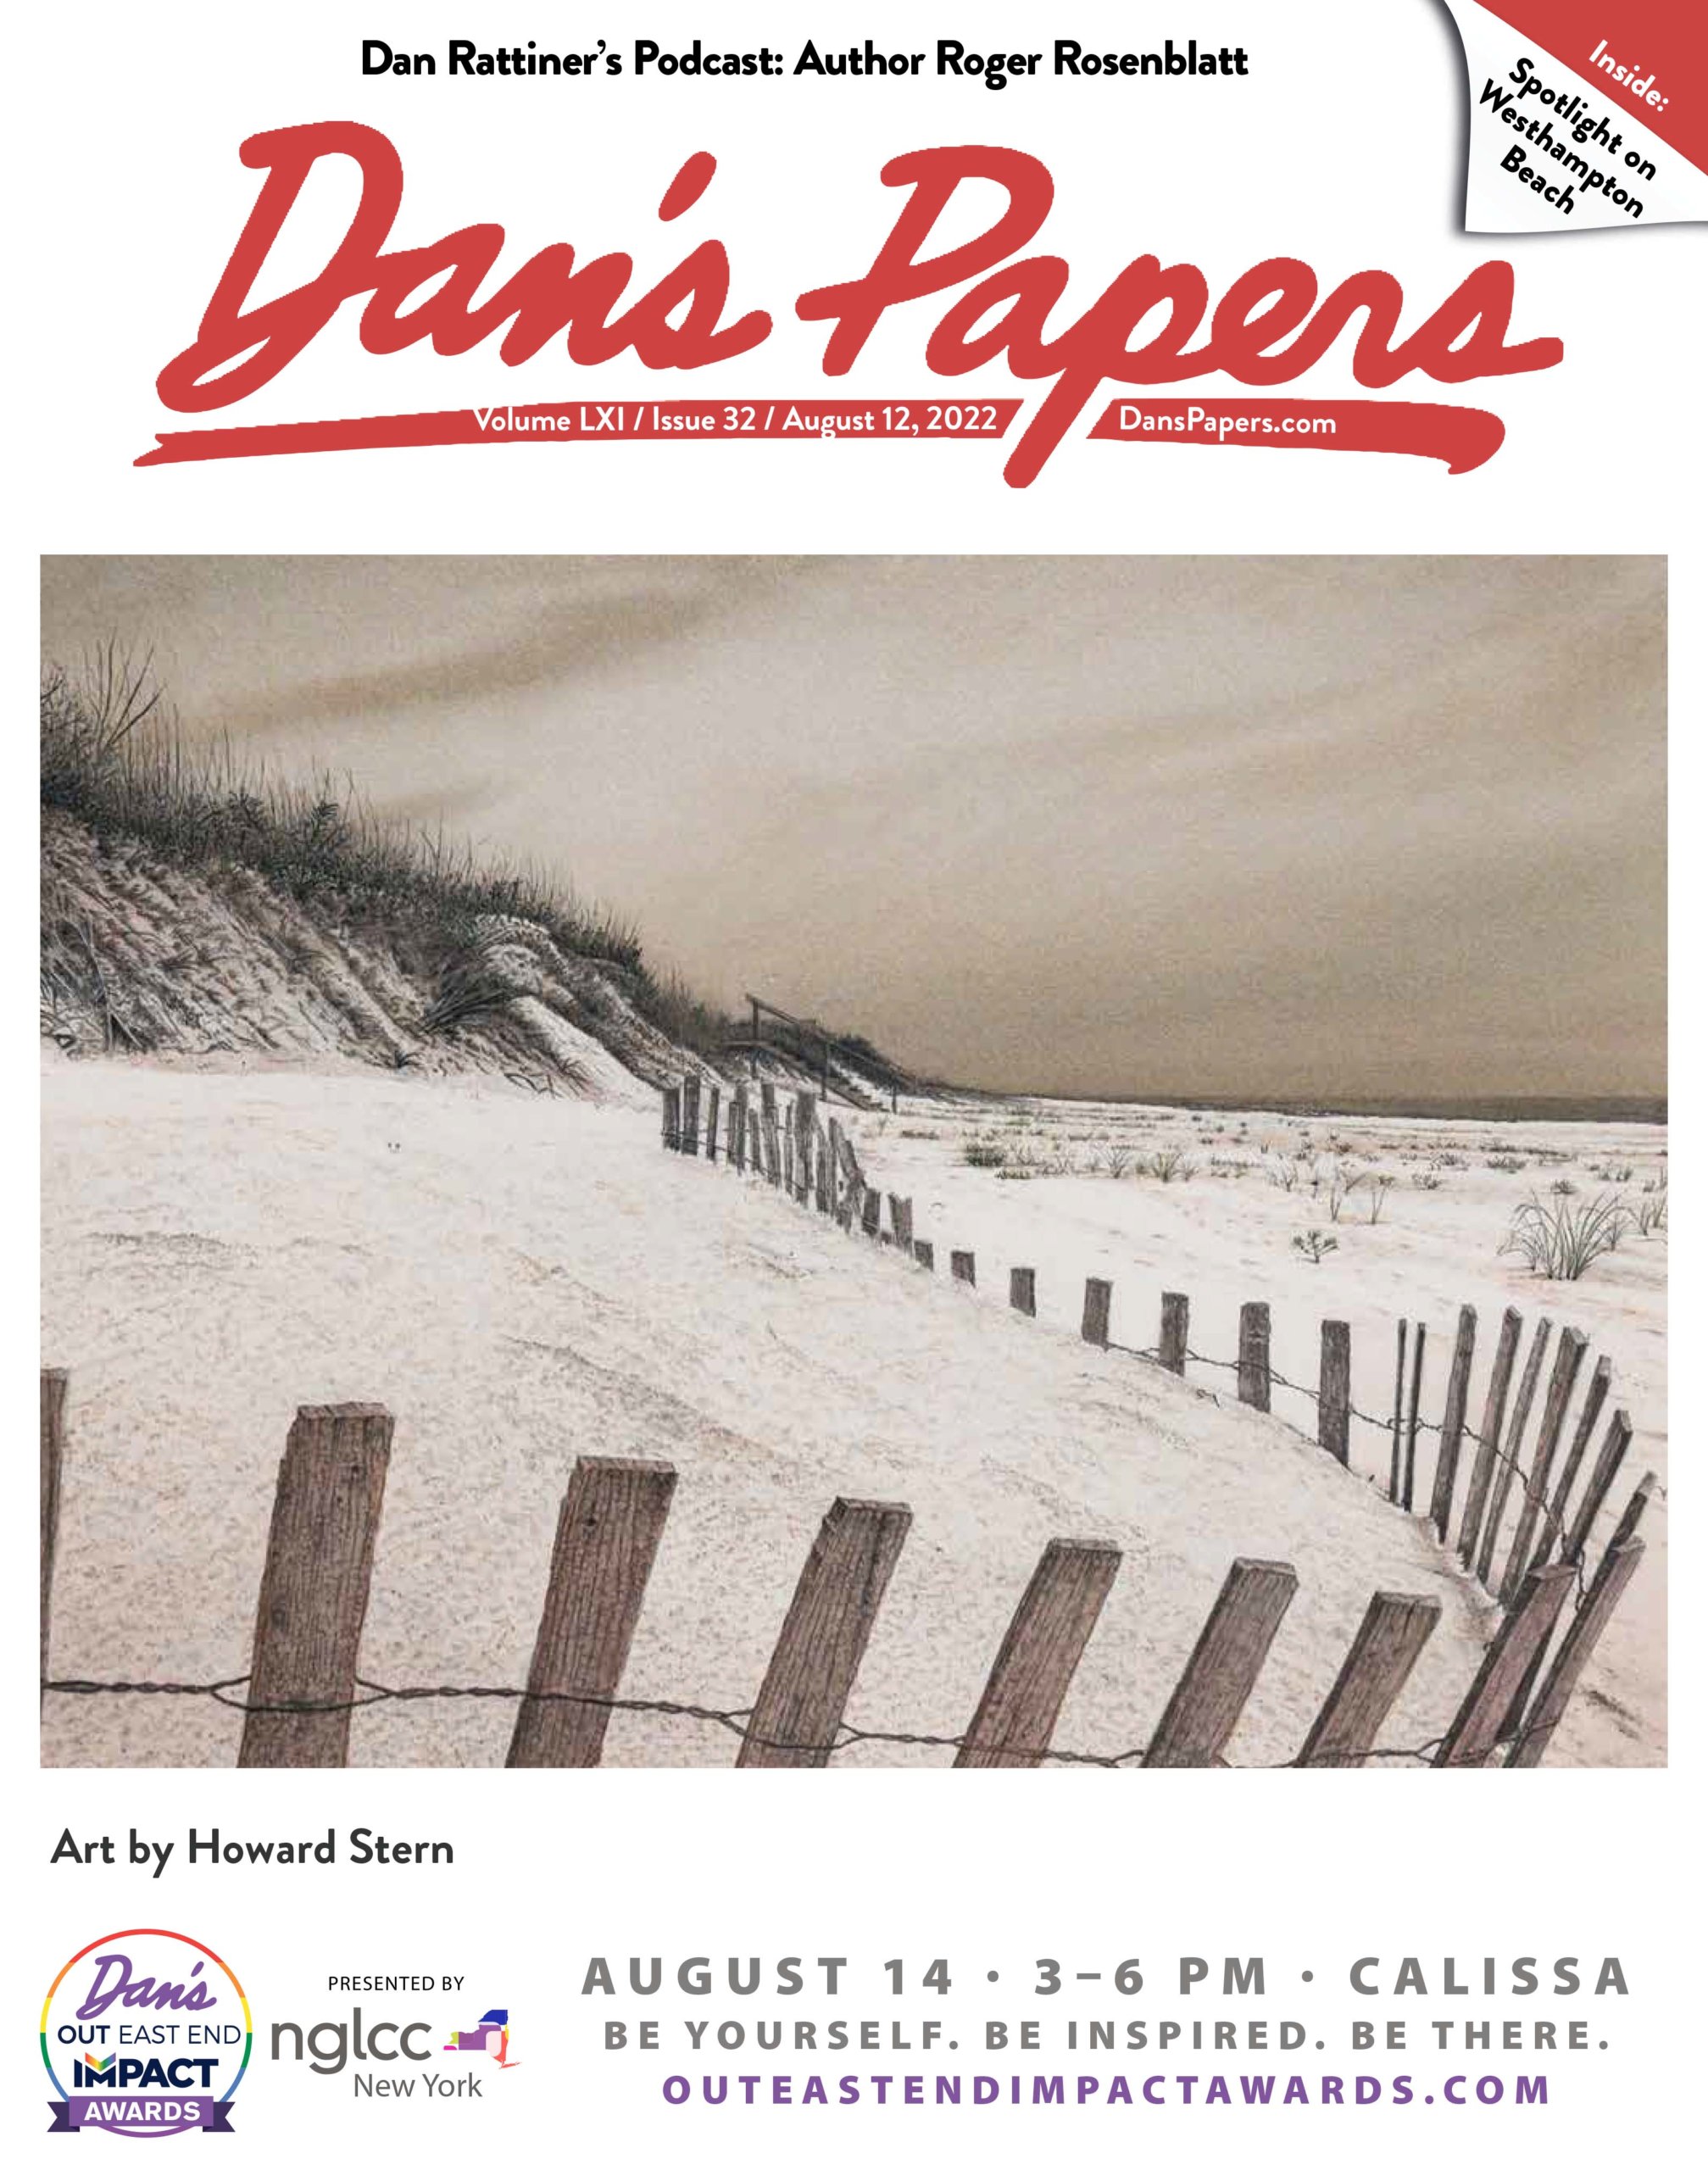 August 12, 2022 Dan's Papers cover art by Howard Stern